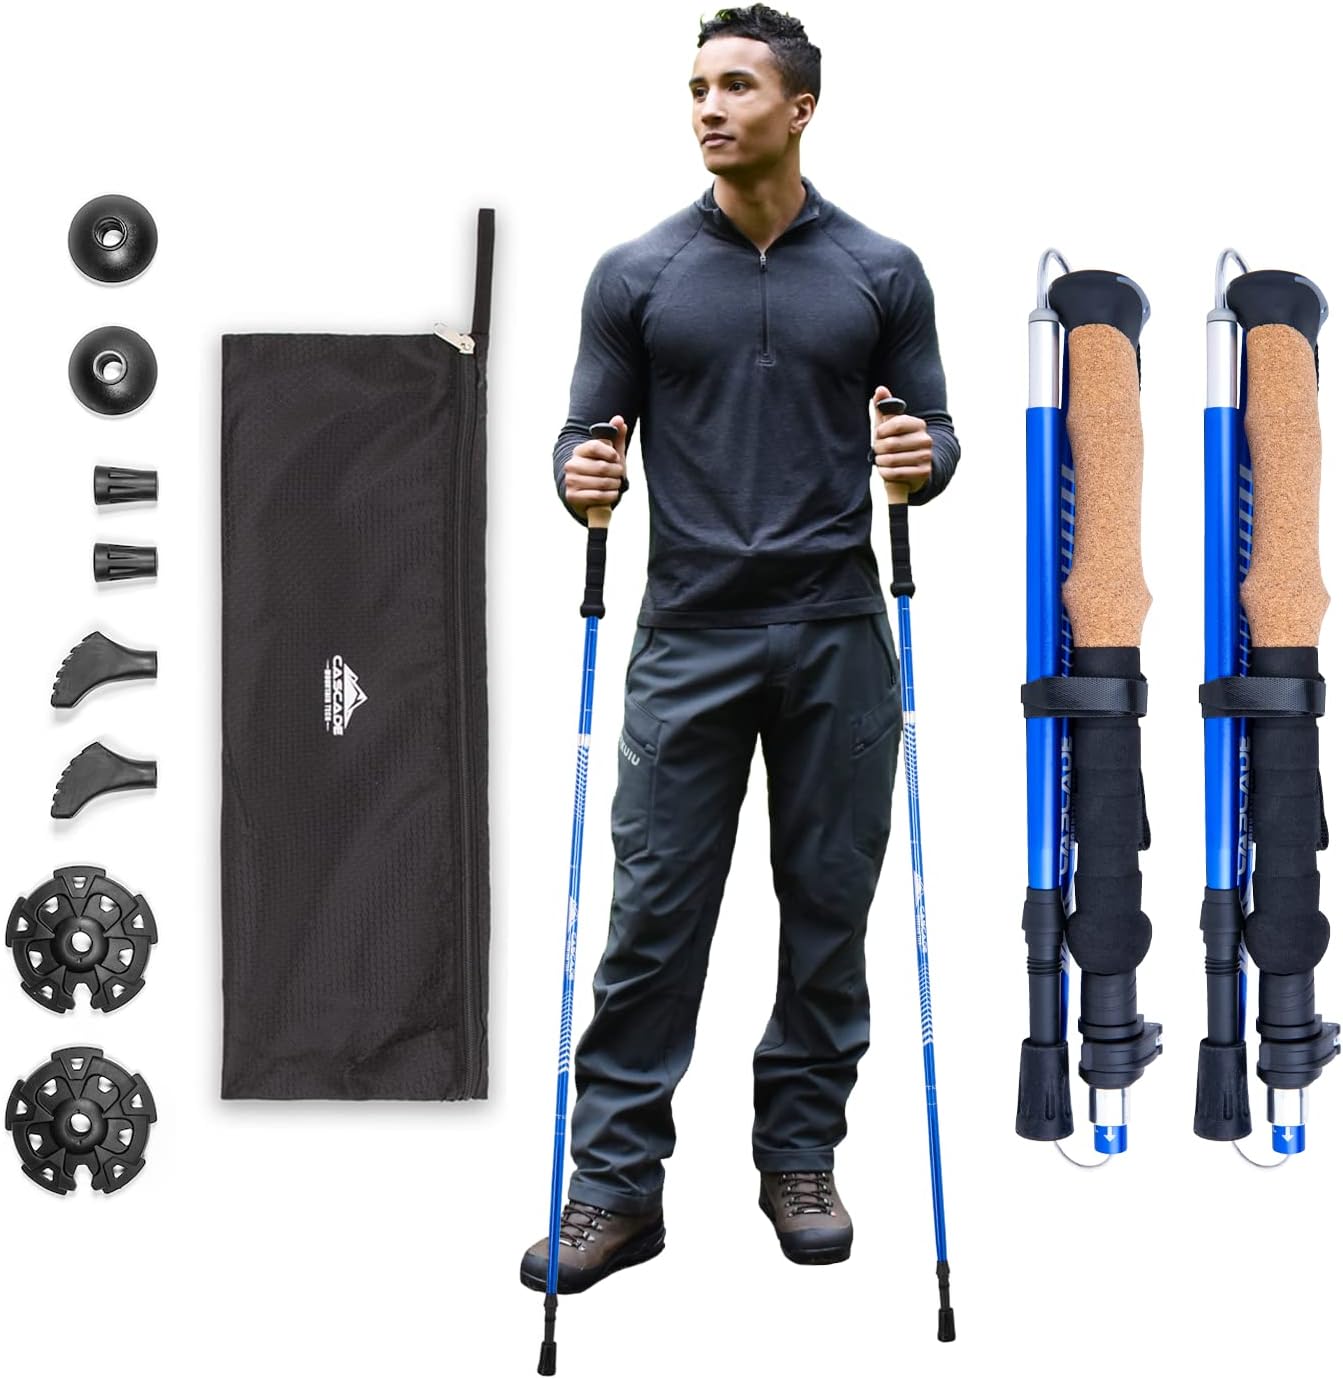 Lightweight Trekking Poles with Extended Down Grip Plus Tip Kit